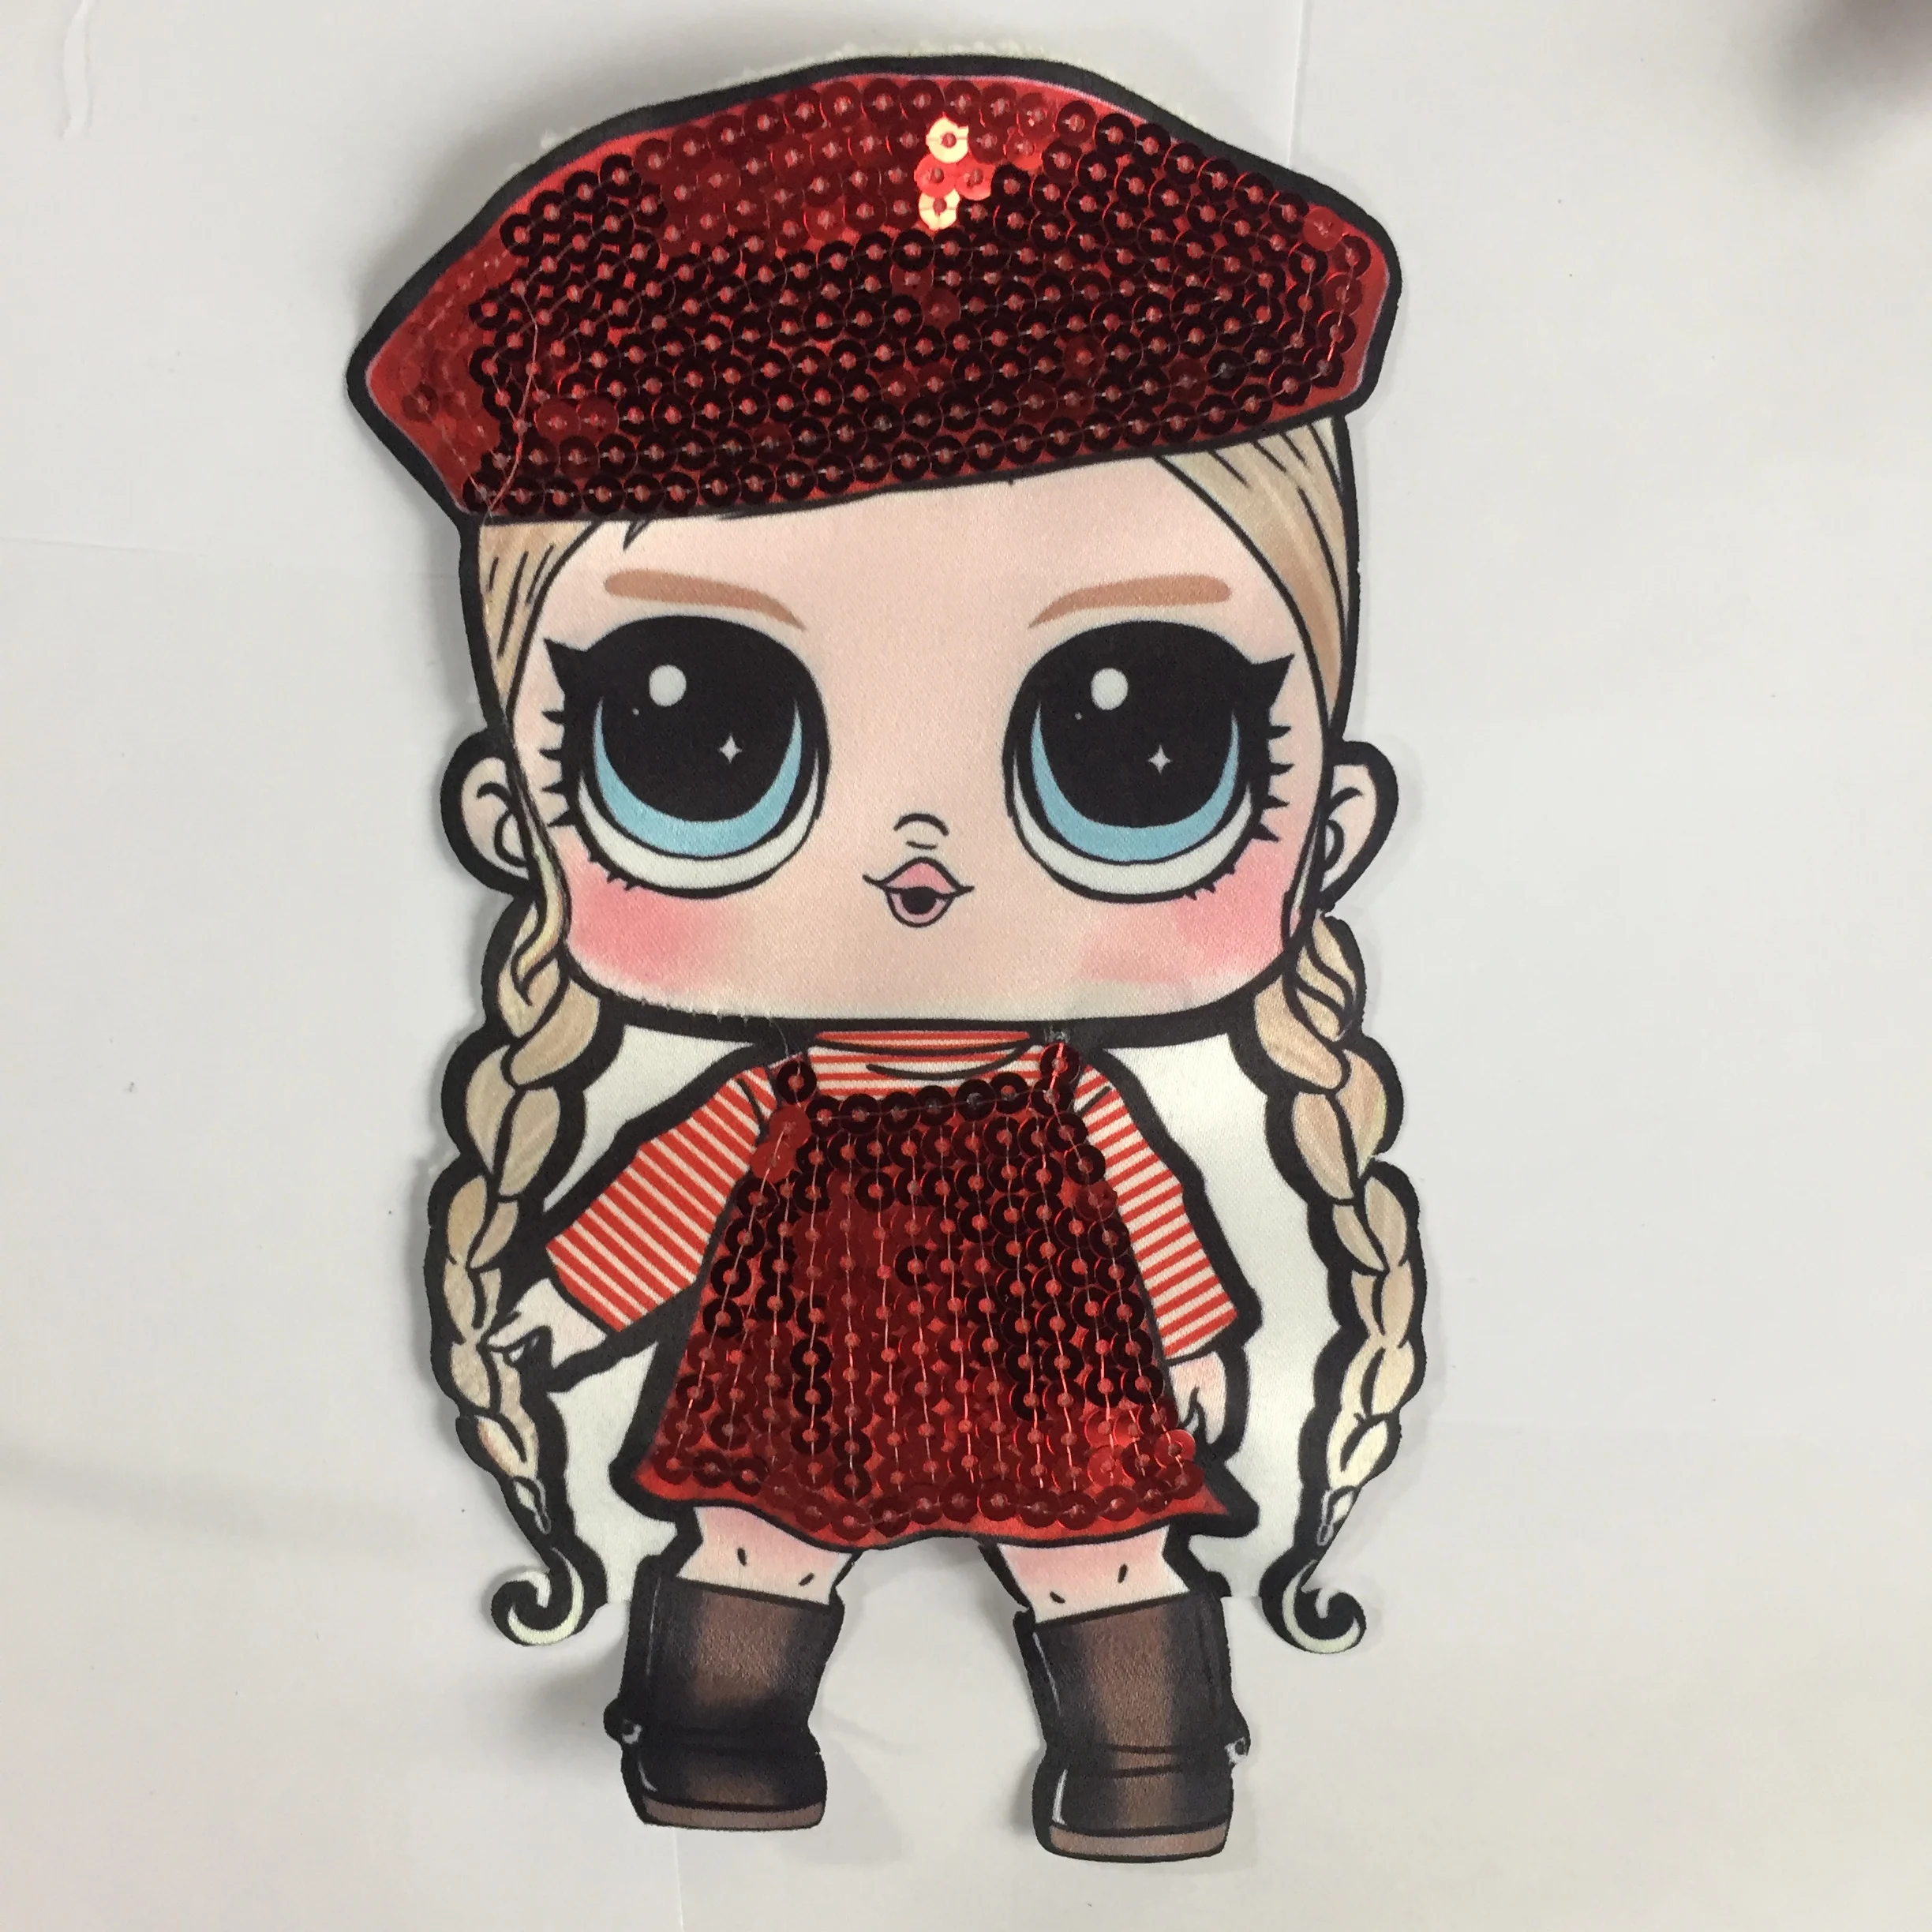 

2020 Wholesale 3D Fashion Clothes Cartoon Patch with Flashing Led lights Sequin Embroidery Patches, Custom color